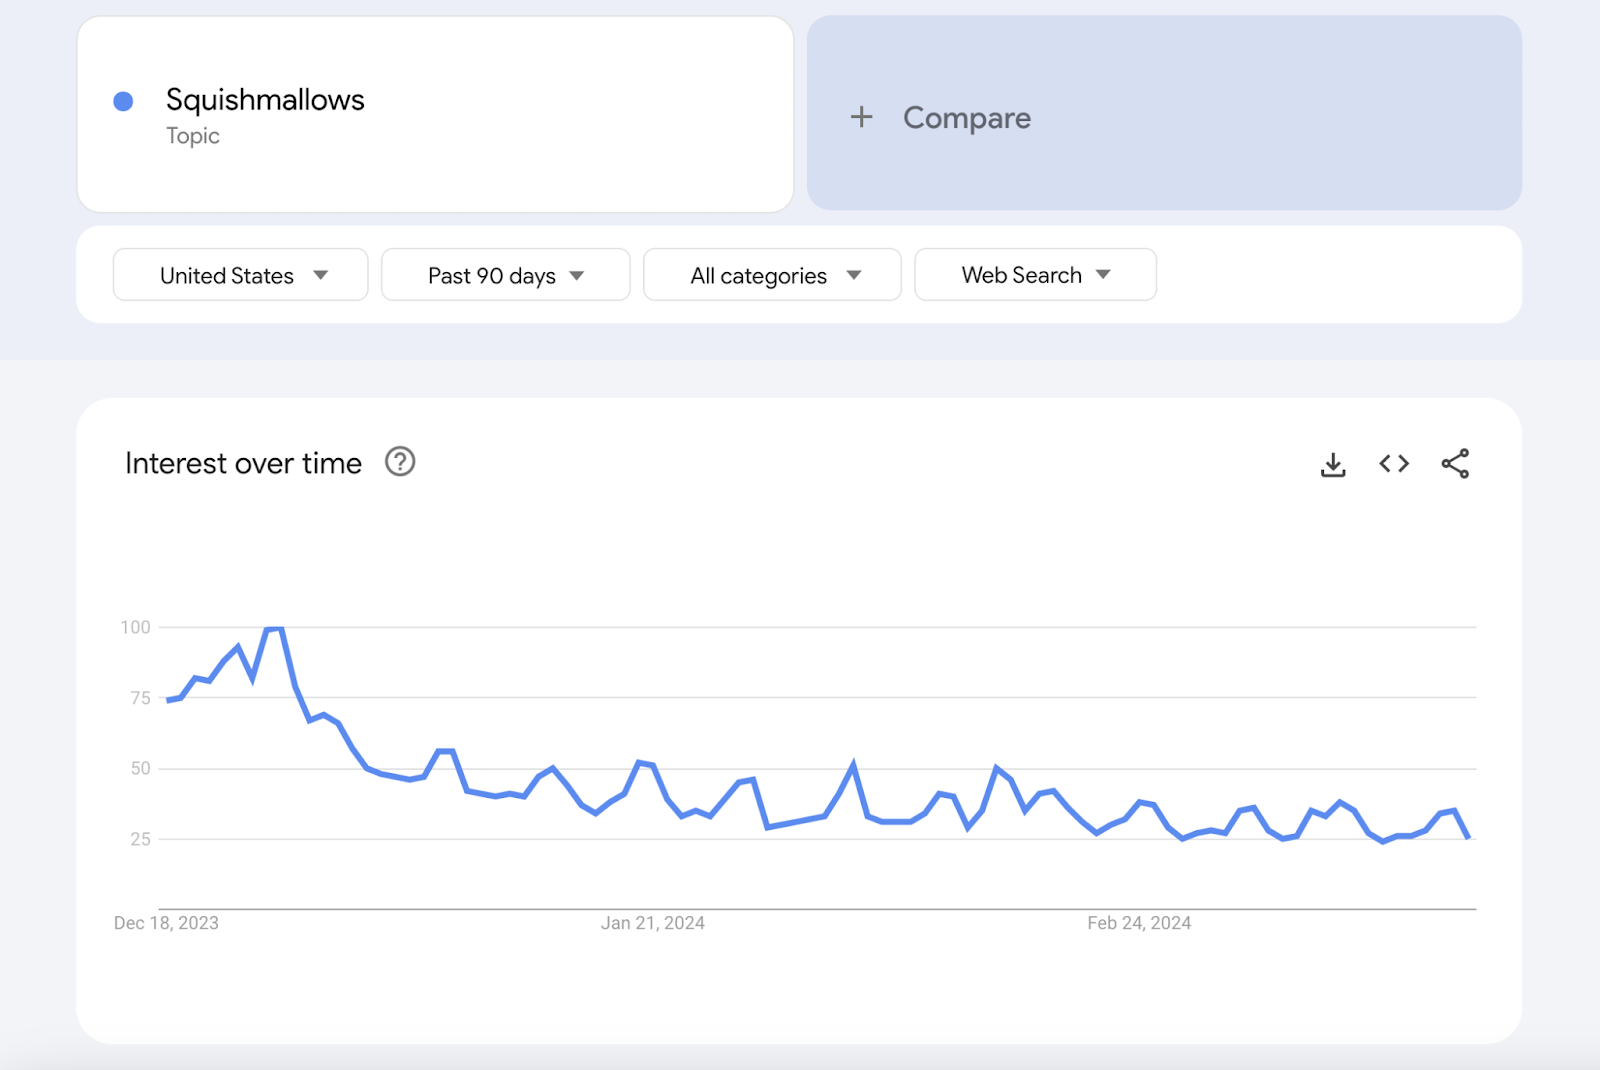 Google Trends Interest over time graph for "squishmallows"